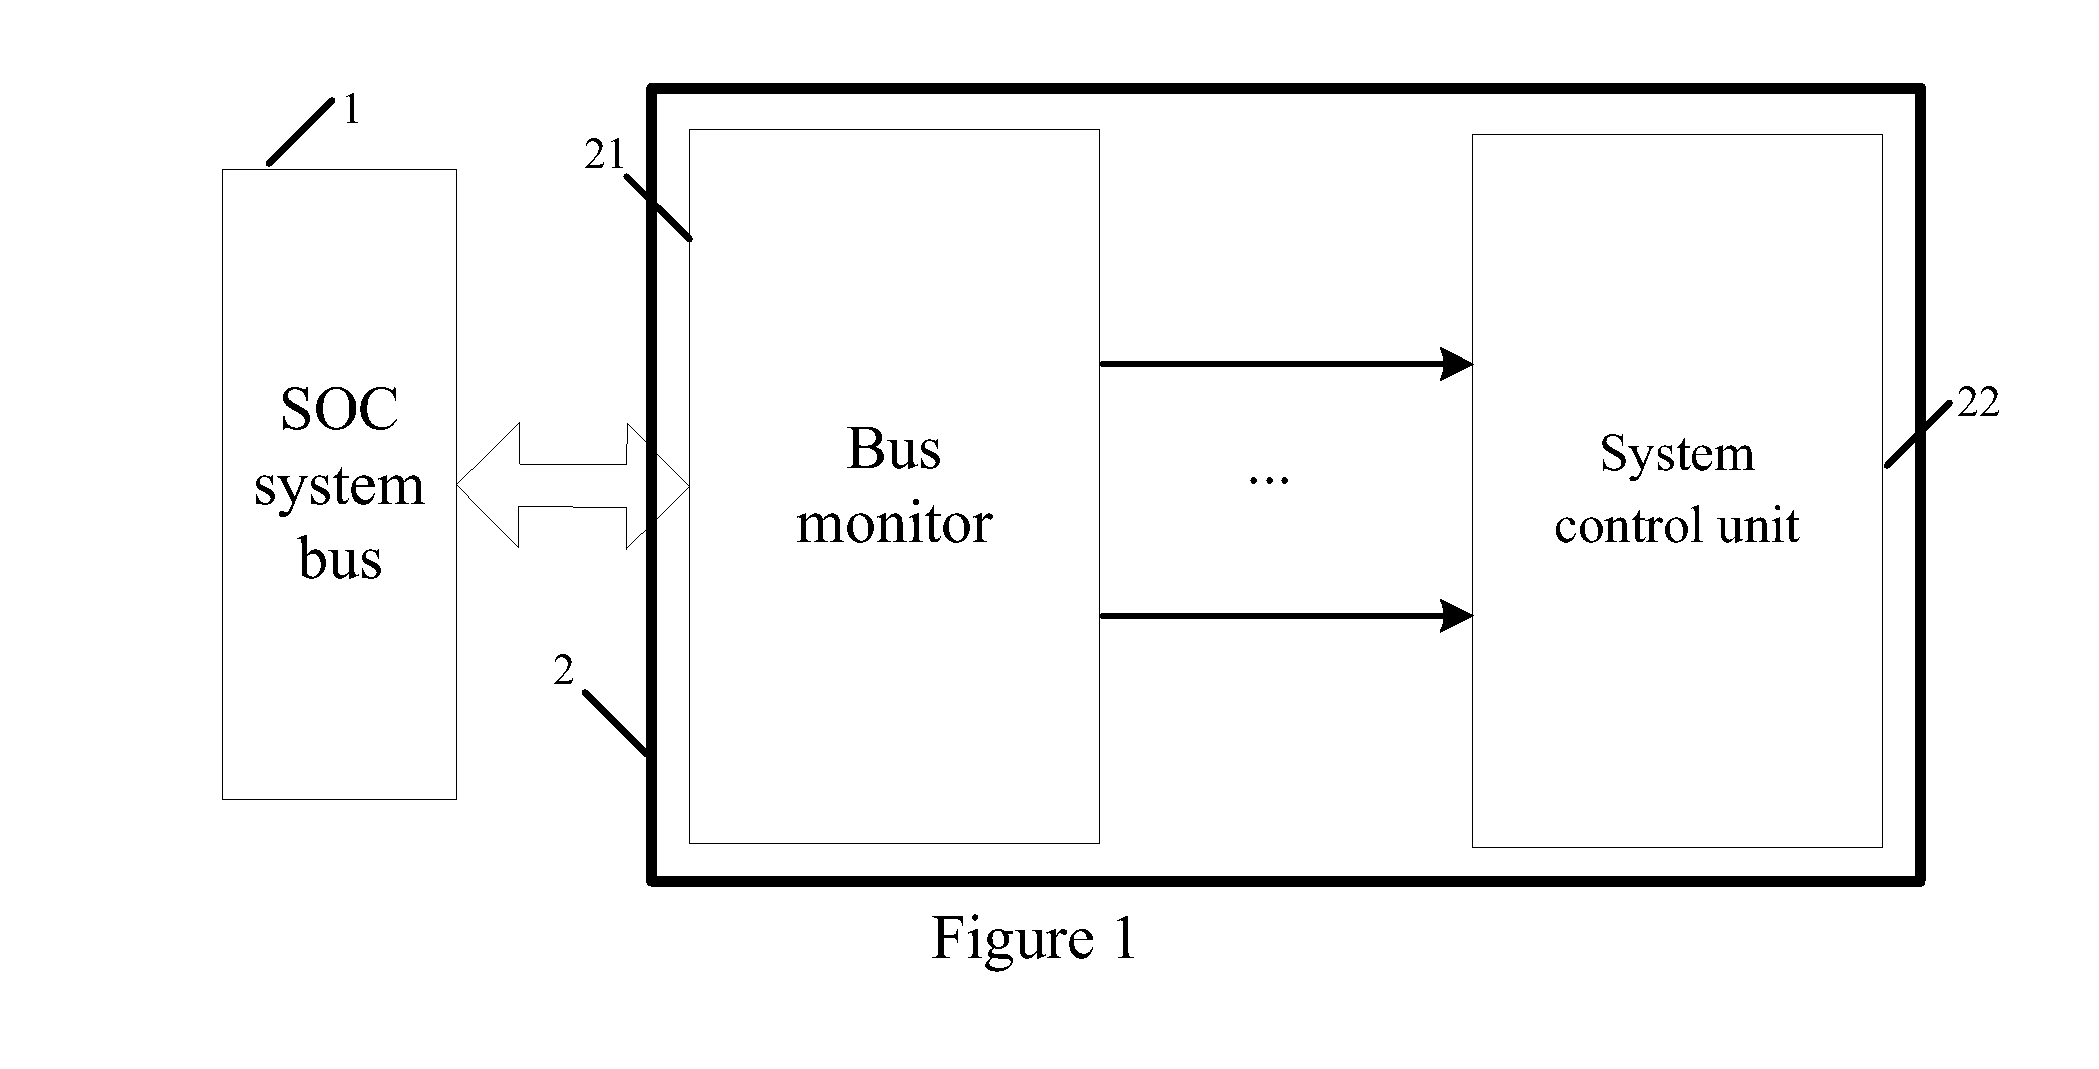 Bus monitor for enhancing soc system security and realization method thereof